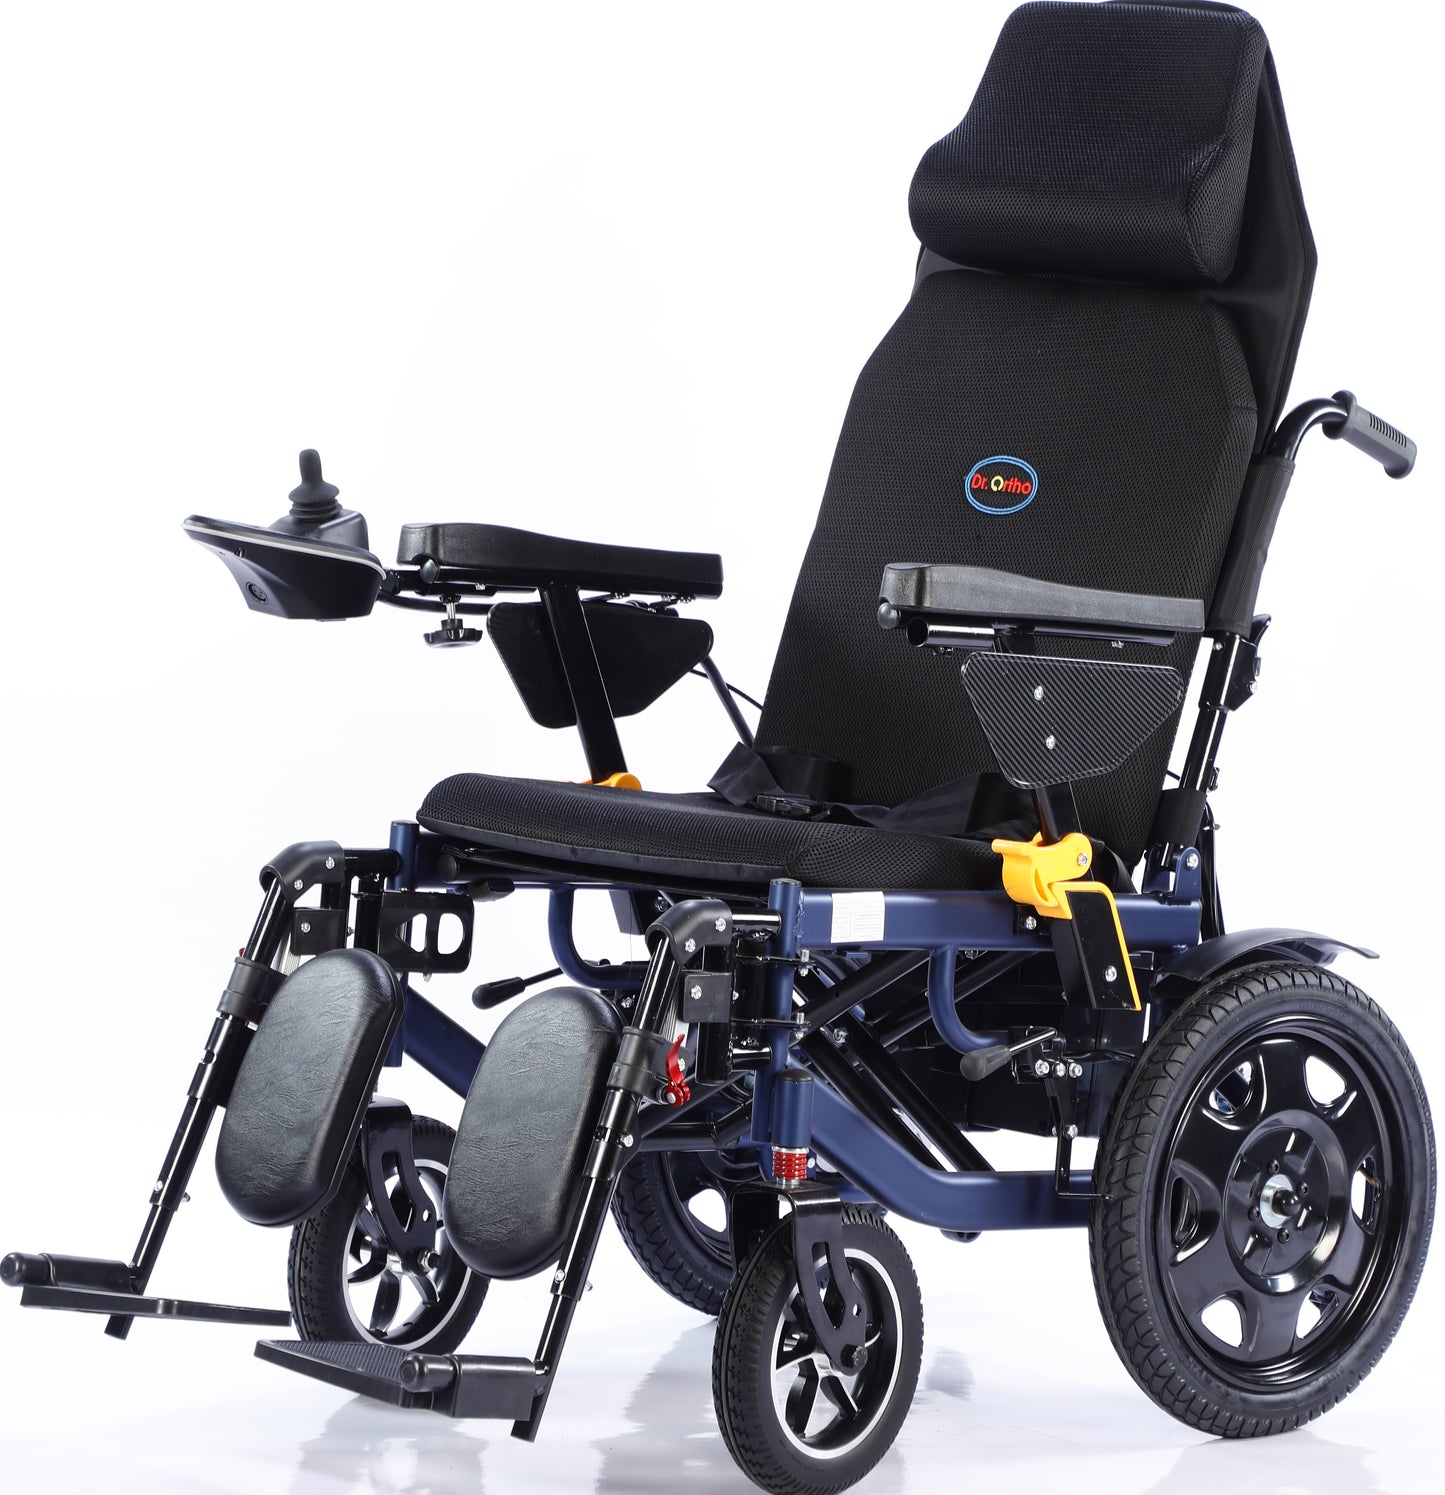 Dr.Ortho electric wheelchair DR-N-40-E blue frame with Detached hydrulic Adjustable Footrest and Recling Backrest